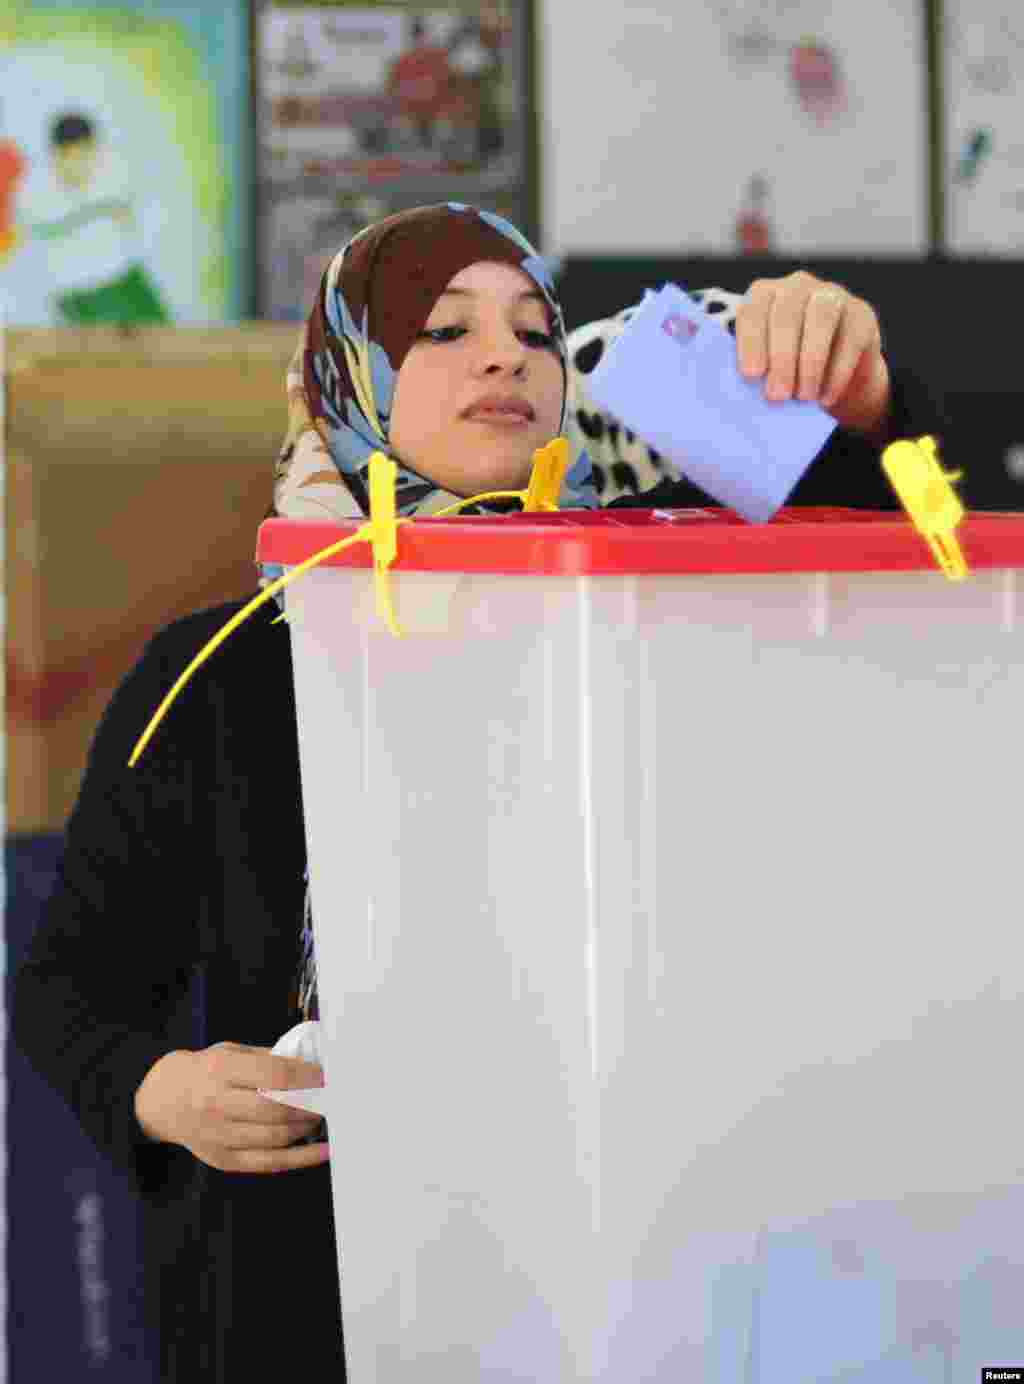 A woman casts her vote at a polling station during the National Assembly election in Benghazi July 7, 2012. Libyans, some with tears of joy in their eyes, queued to vote in their first free national election in 60 years on Saturday, a poll designed to sha